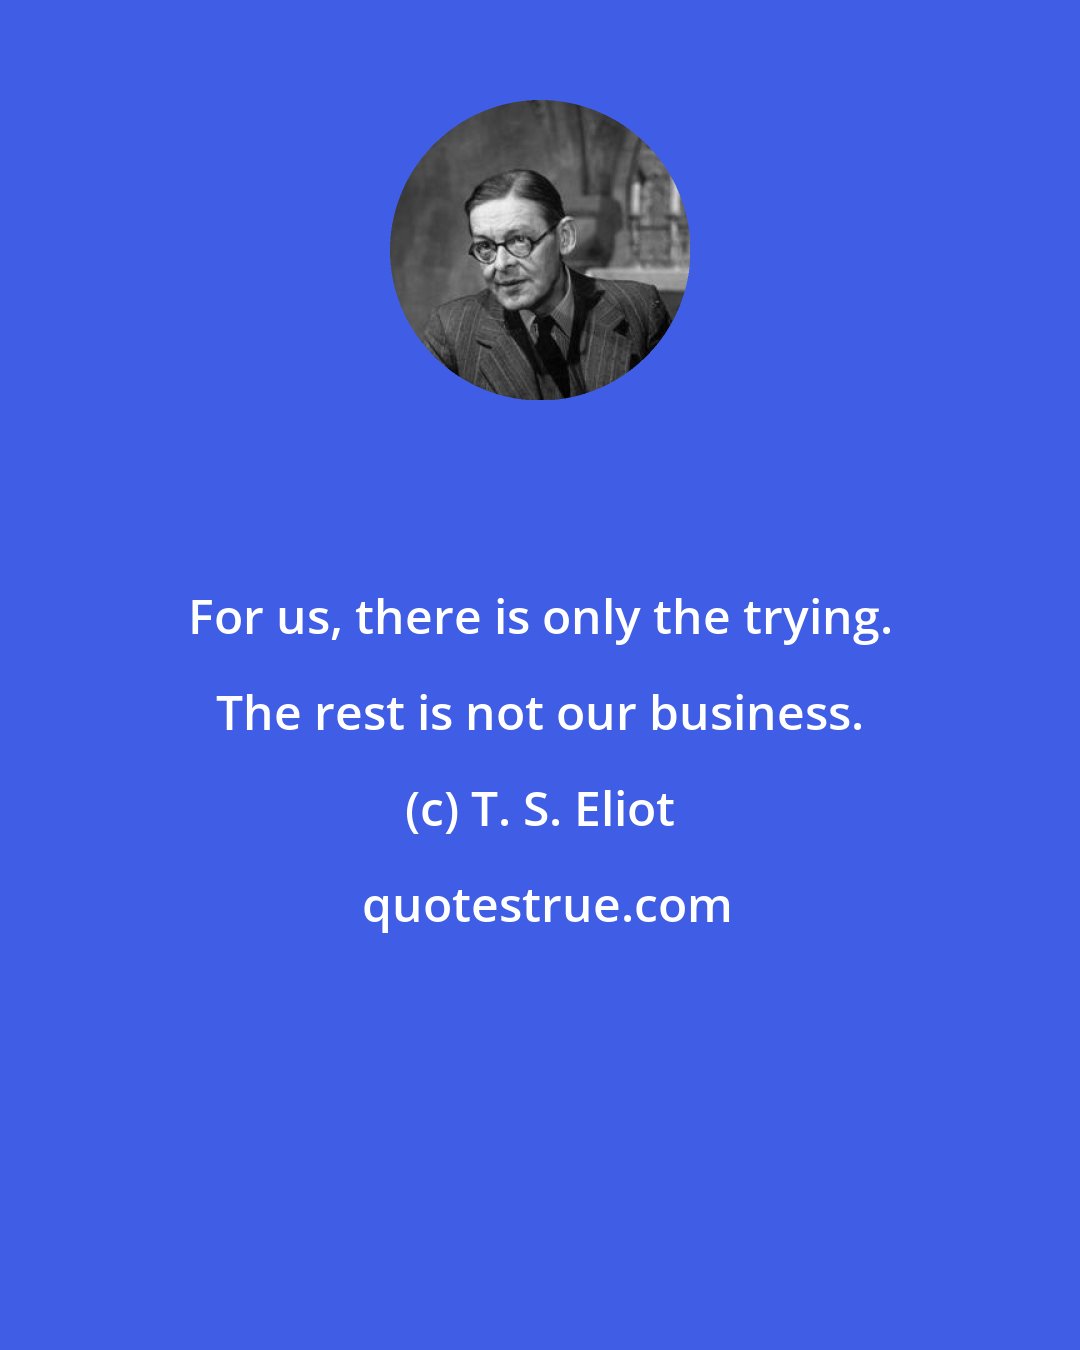 T. S. Eliot: For us, there is only the trying. The rest is not our business.